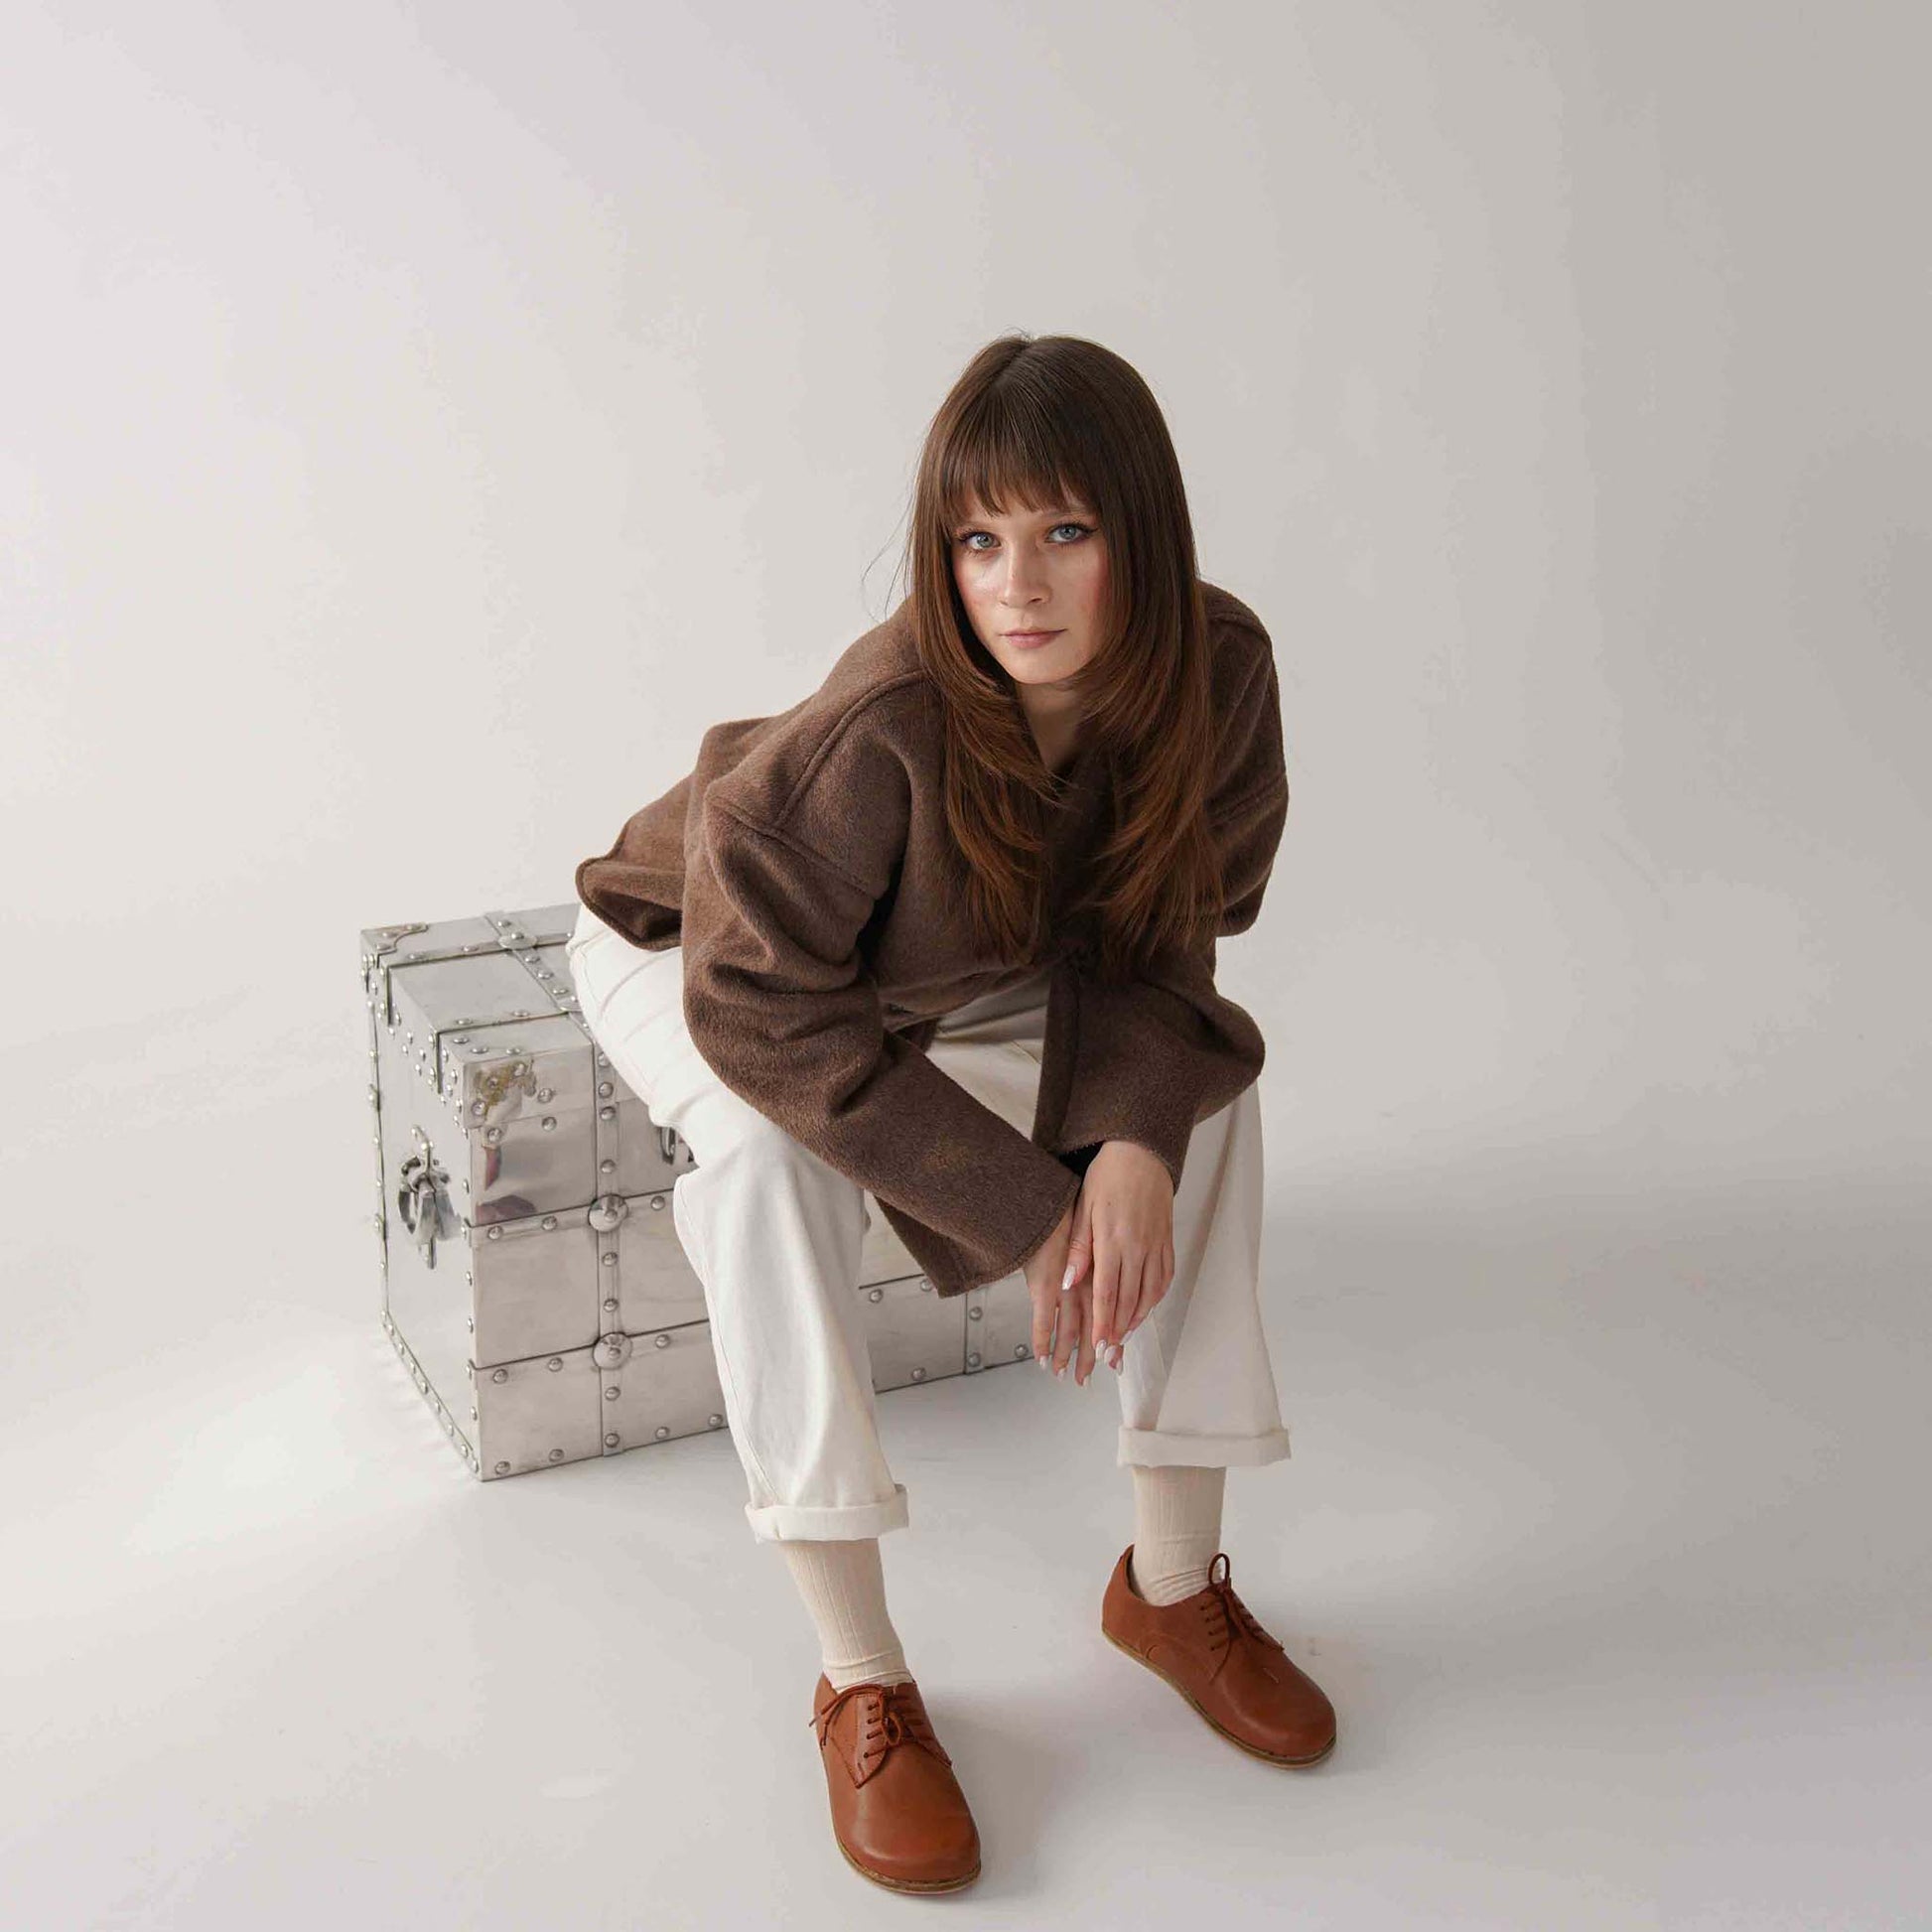 Model sitting in a stylish outfit, wearing Locris Tan Brown Leather Barefoot Women Oxfords, highlighting comfort and versatility.